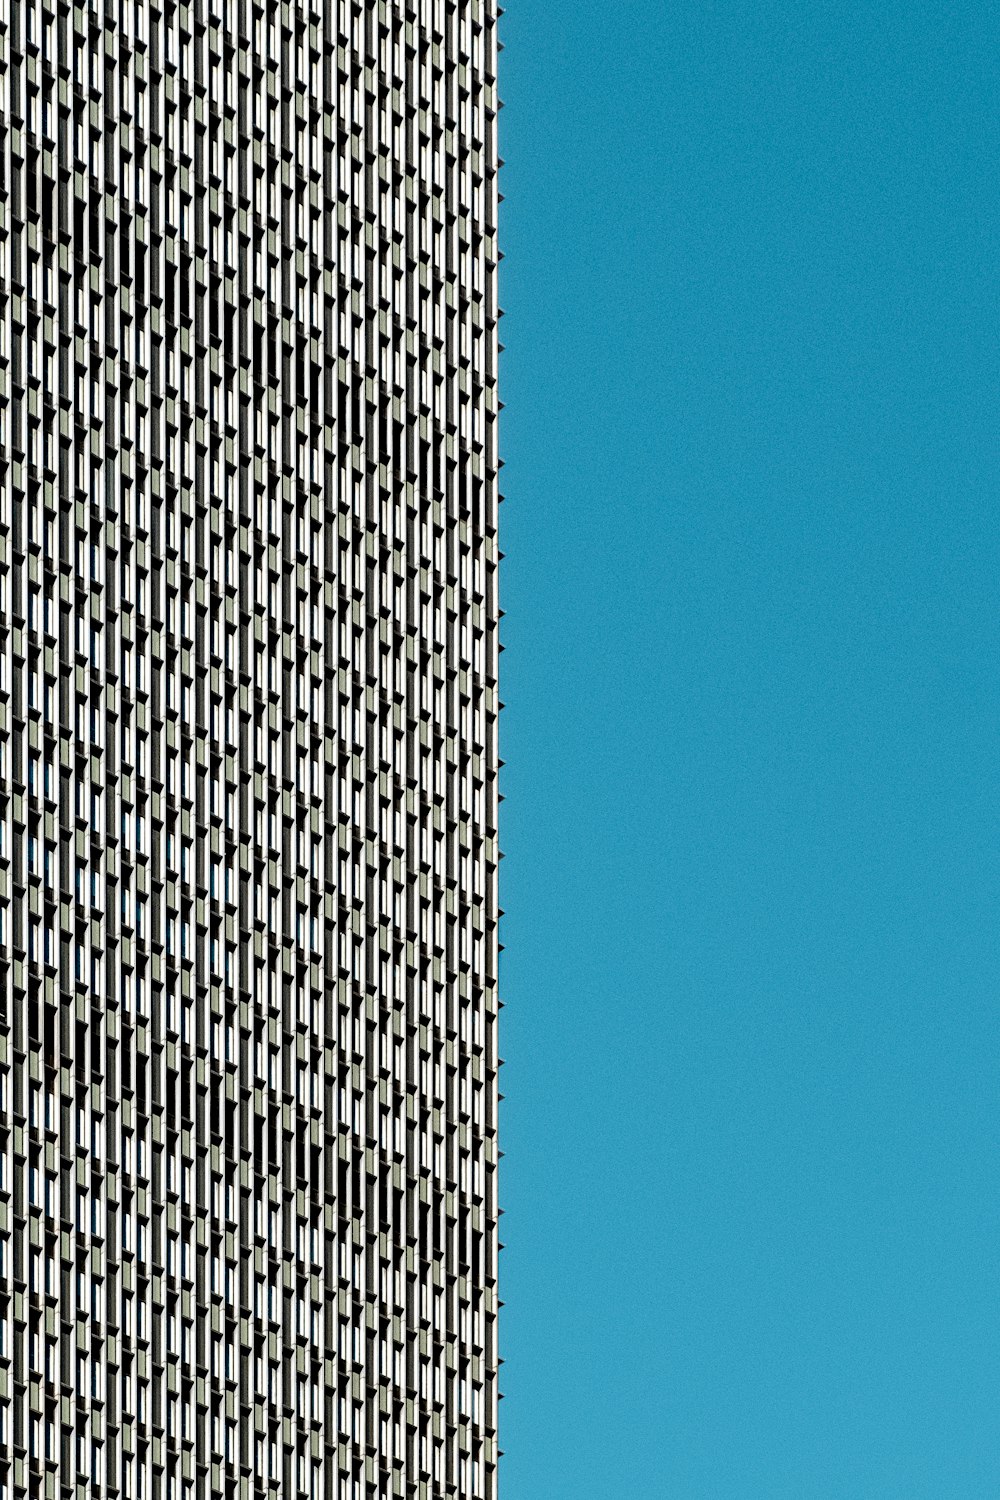 black and white textile under blue sky